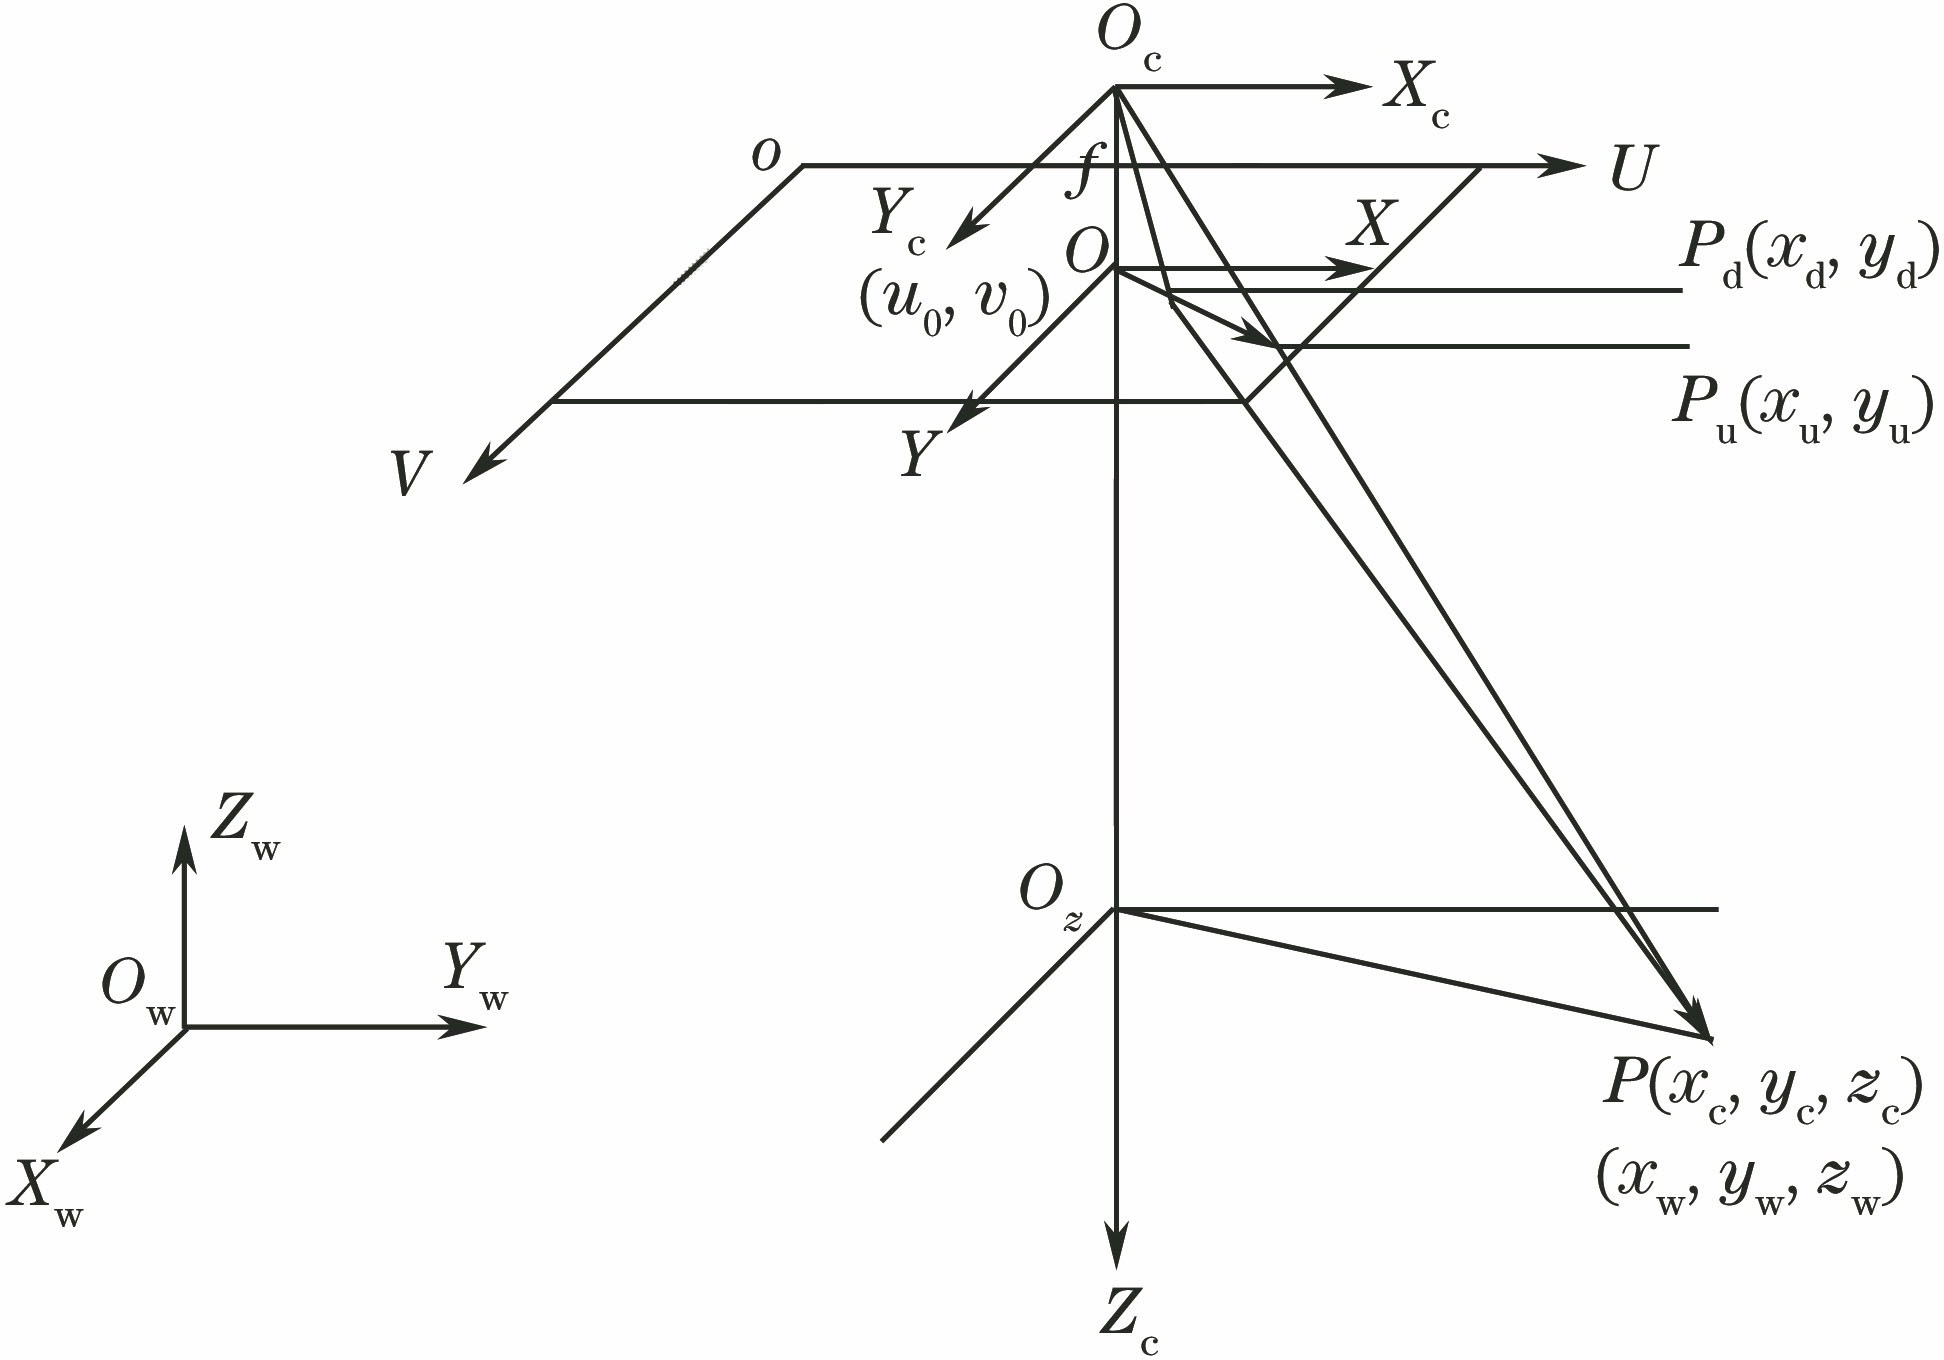 Schematic of relationship among coordinate systems